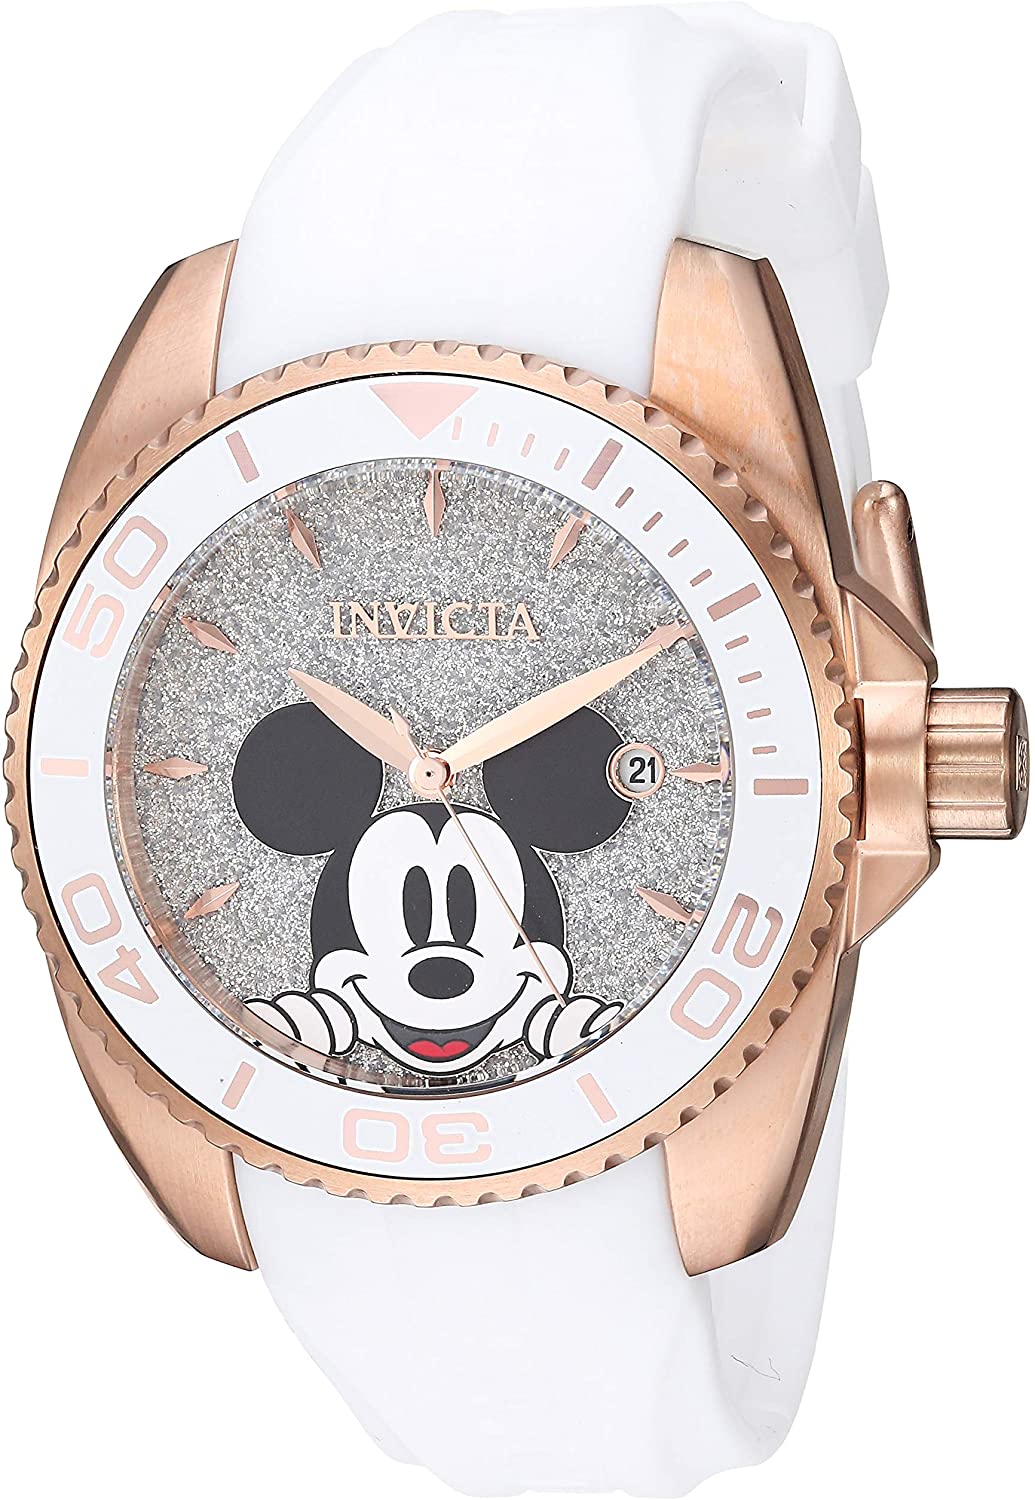 Invicta Women's Disney Limited Edition Stainless Steel Quartz Watch with Silicone Strap, White, 19 (Model: 27380)